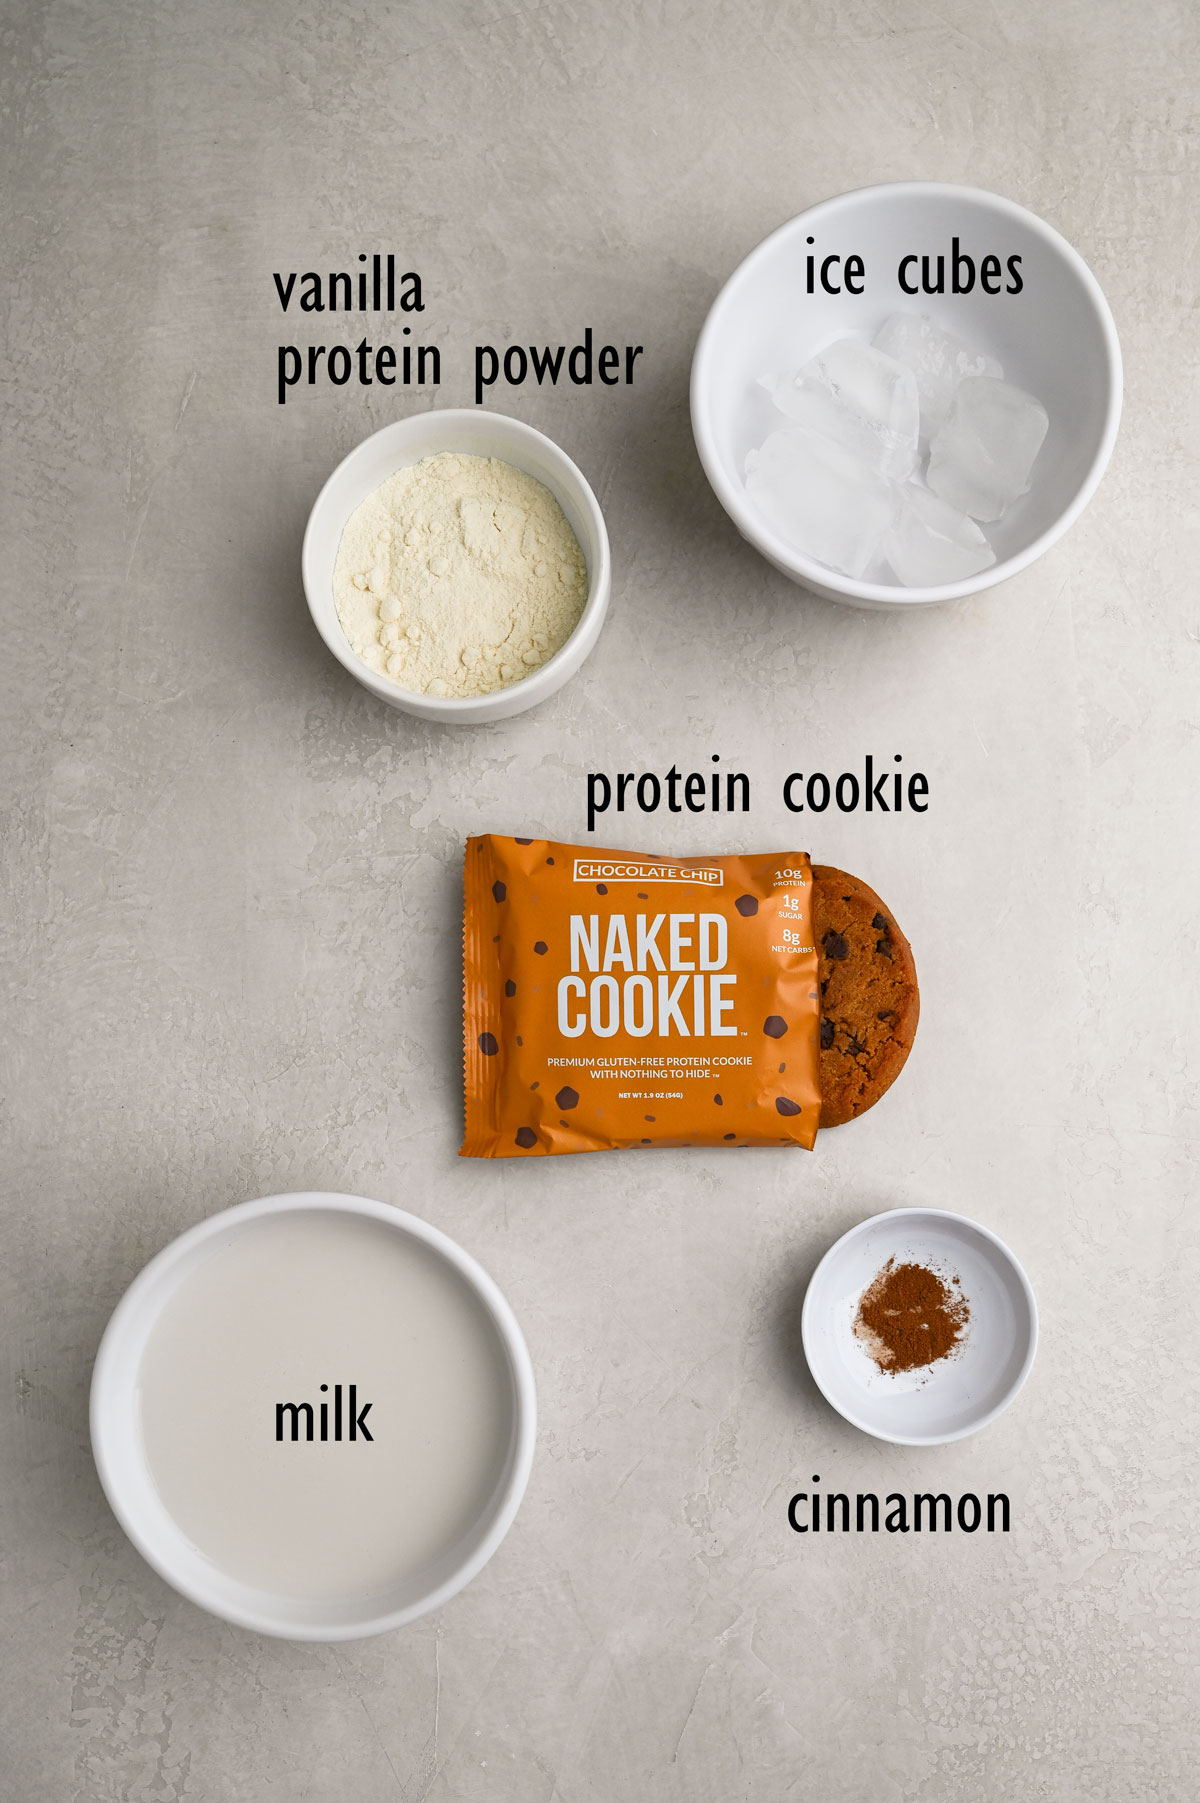 Shake ingredients including protein powder, a protein chocolate chip cookie, ice cubes, almond milk and cinnamon.